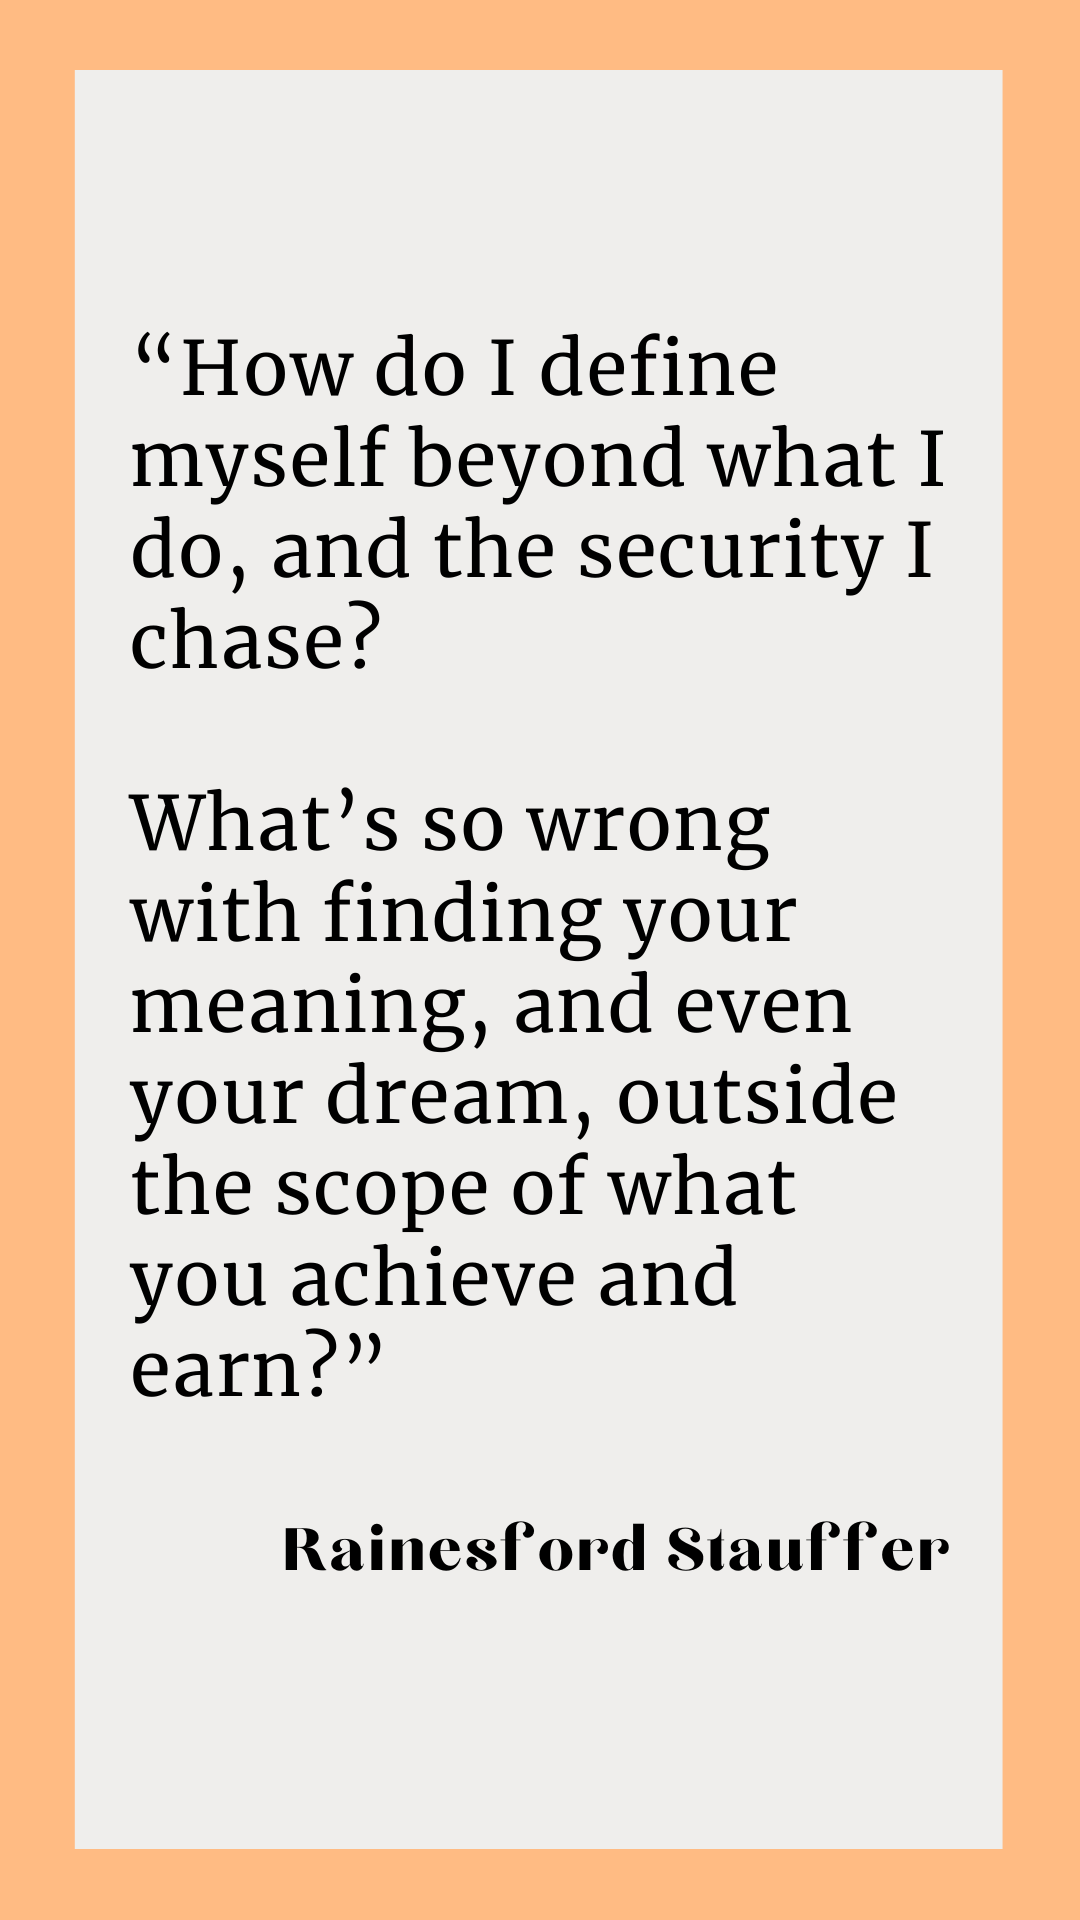 Author Rainesford Stauffer wonders, “How do I define myself beyond what I do, and the security I chase? What’s so wrong with finding your meaning, and even your dream, outside the scope of what you achieve and earn?”